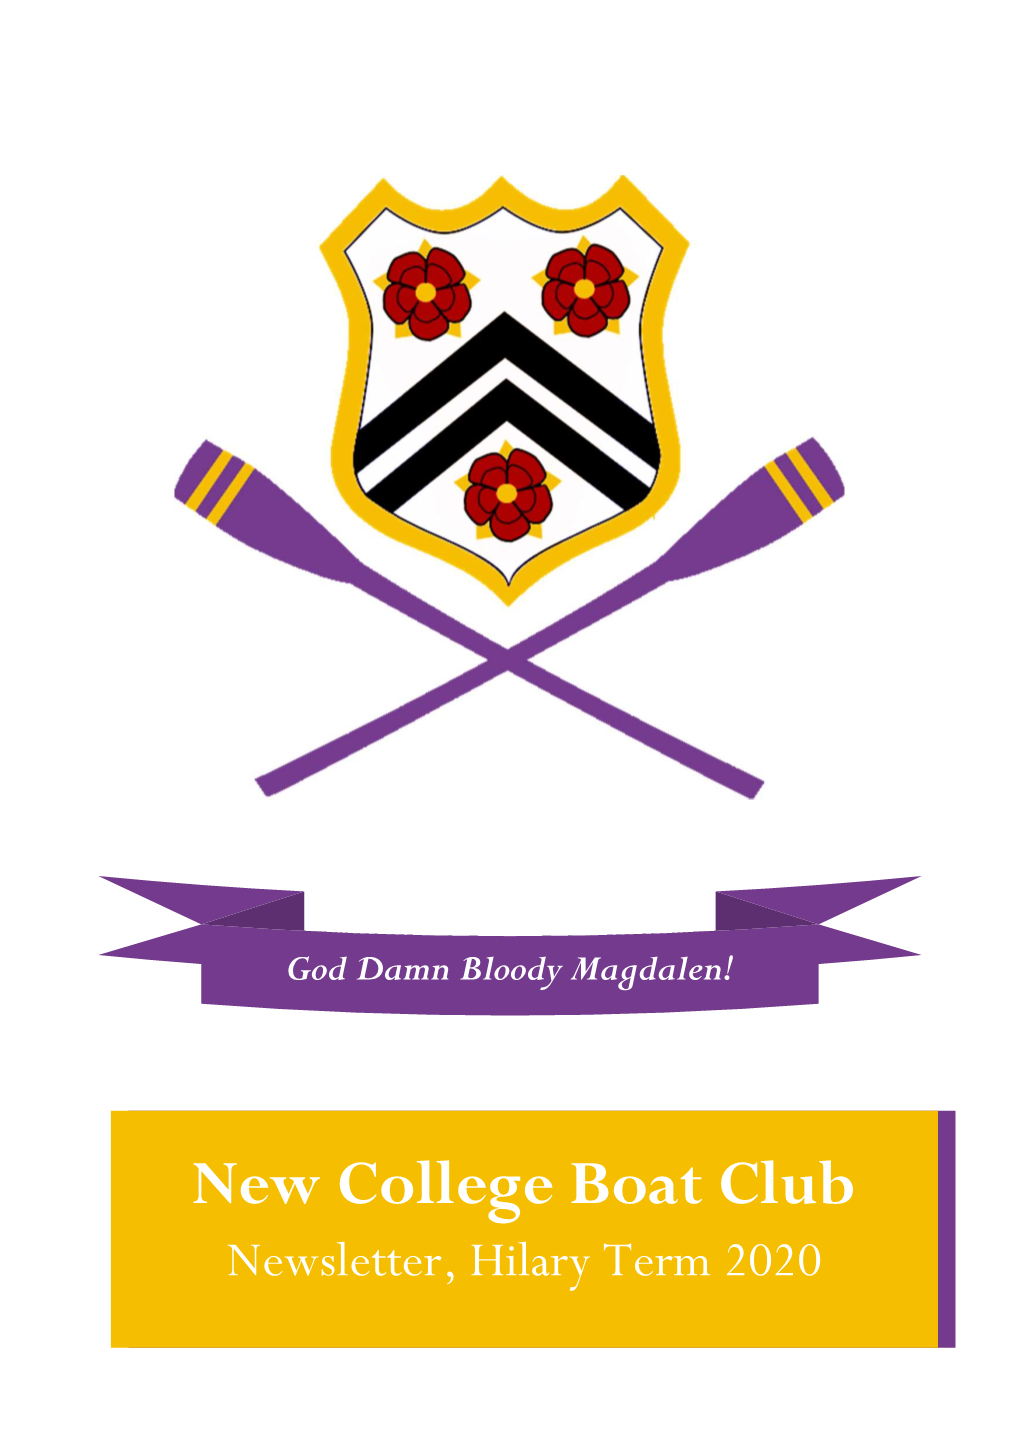 New College Boat Club Newsletter, Hilary Term 2020